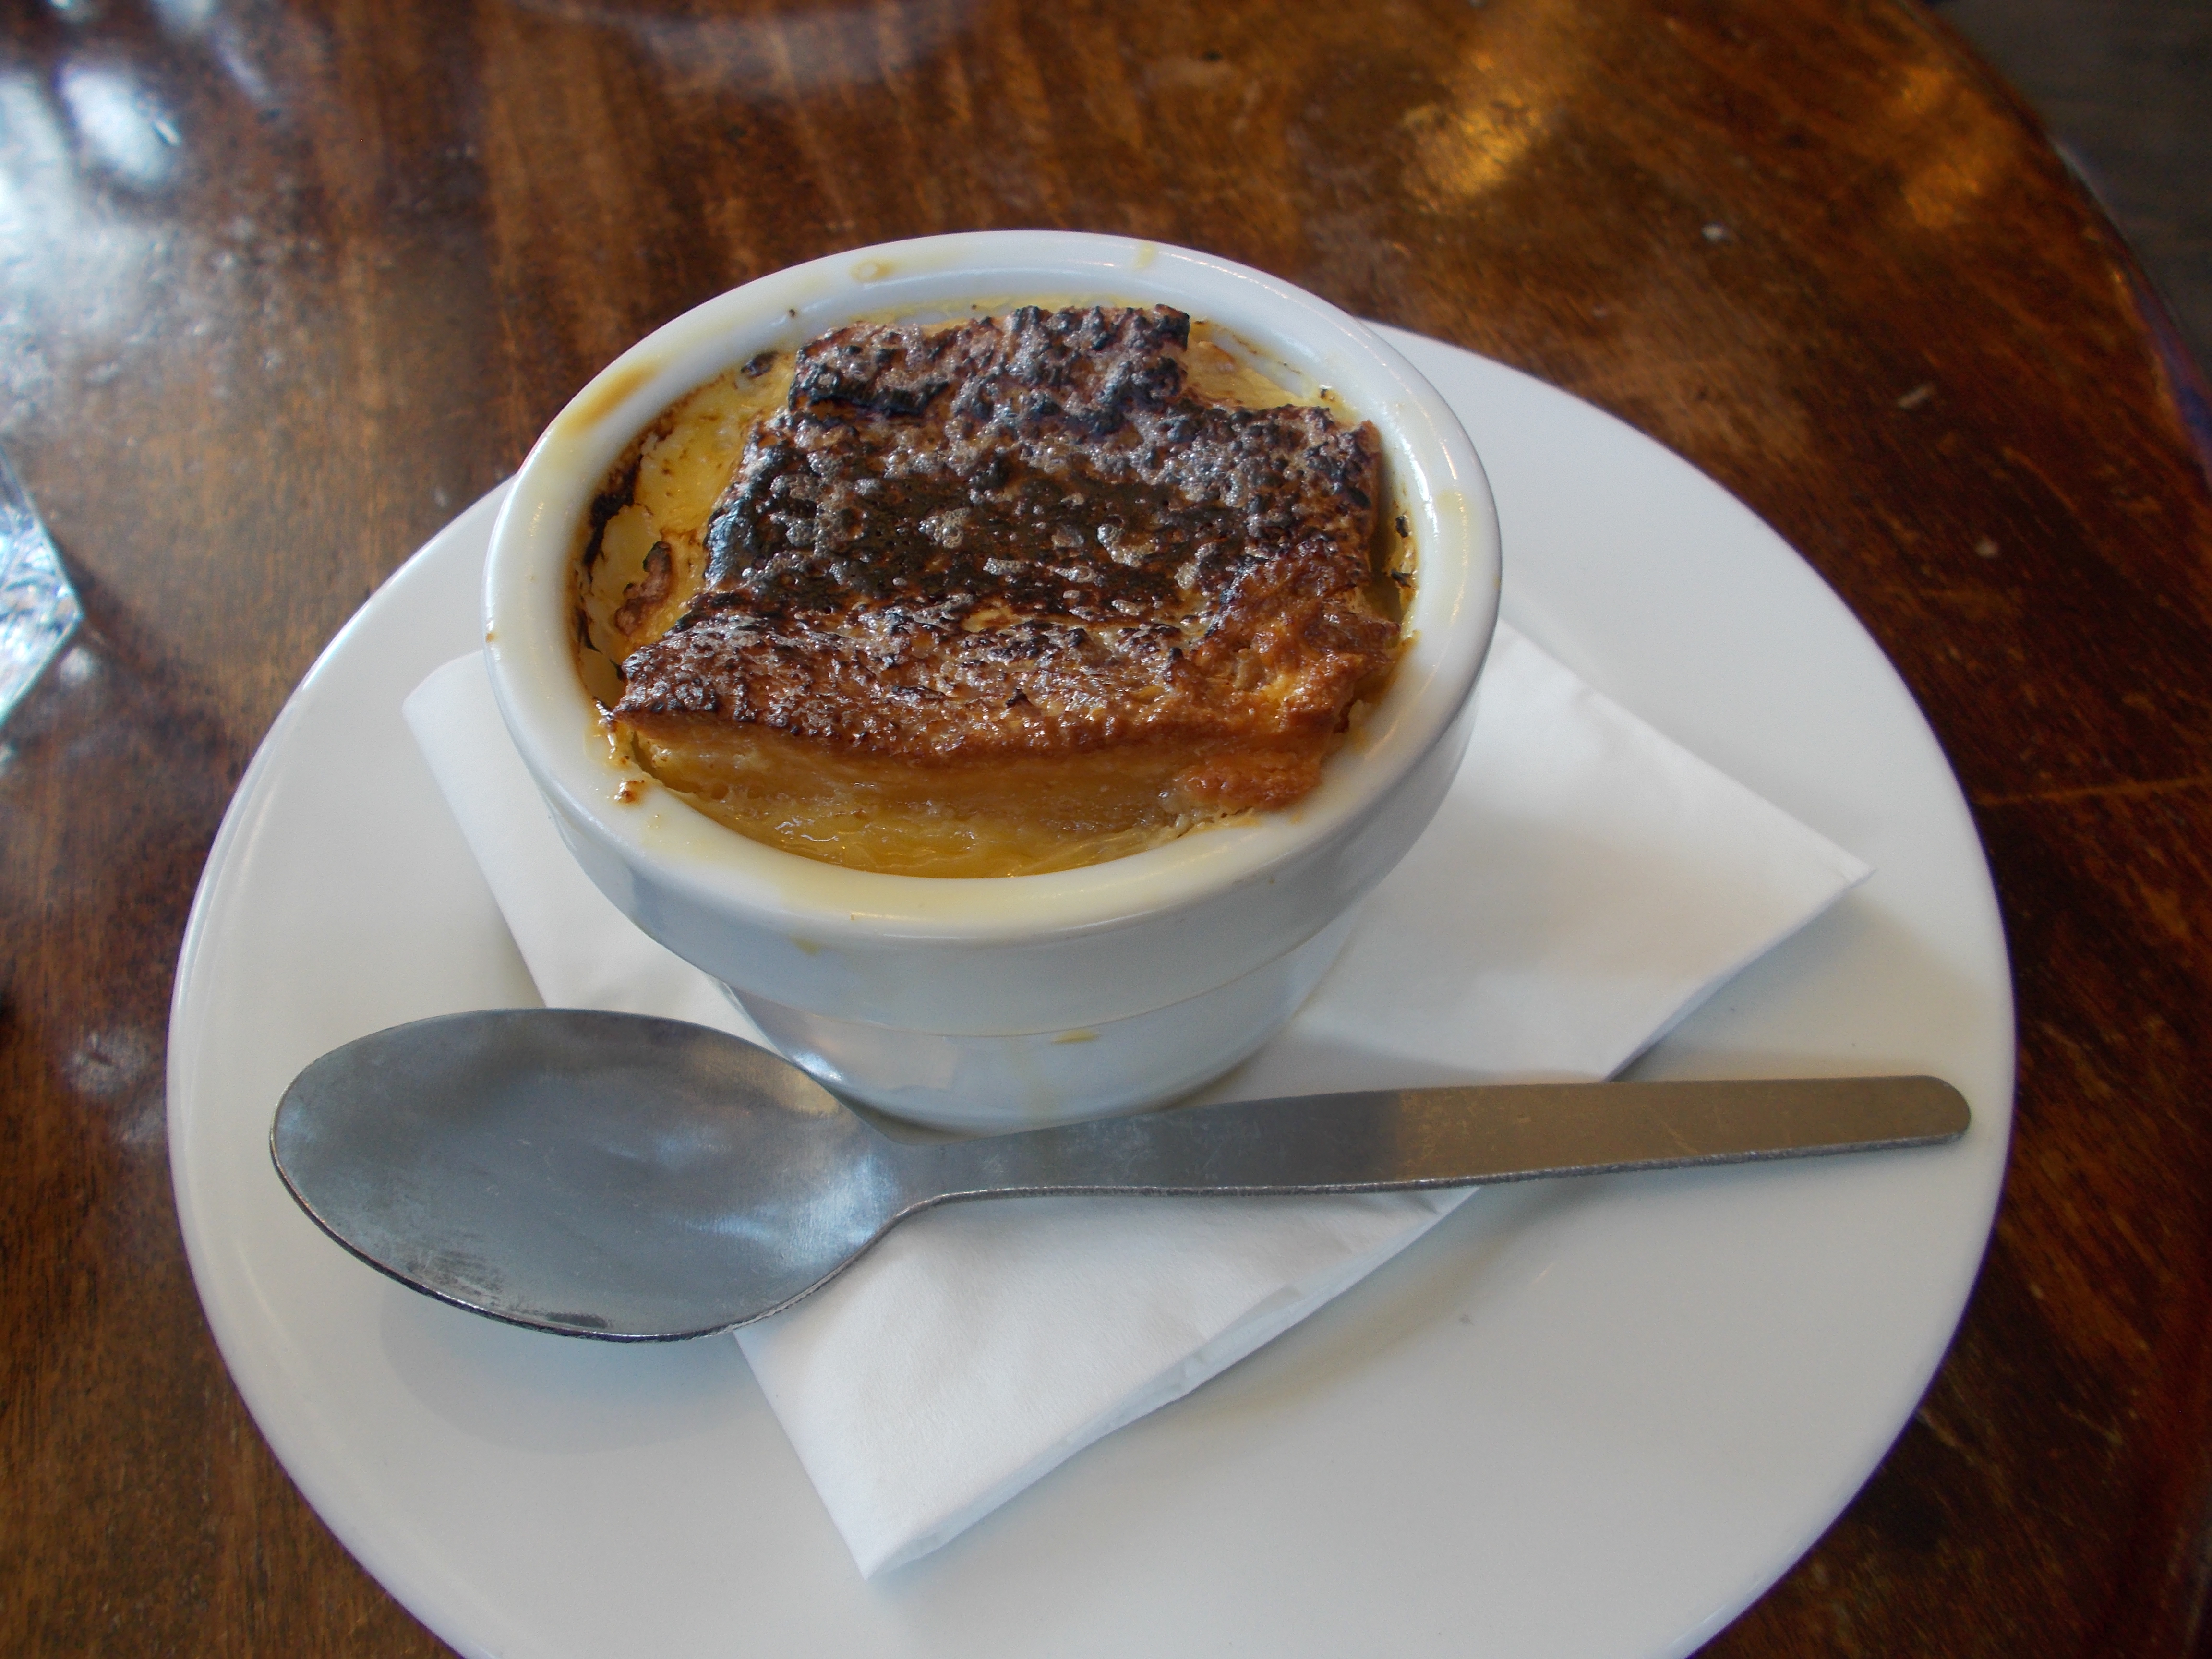 Bread and Butter Pudding The English Breakfast at Spitalfields Eating London Food Tour